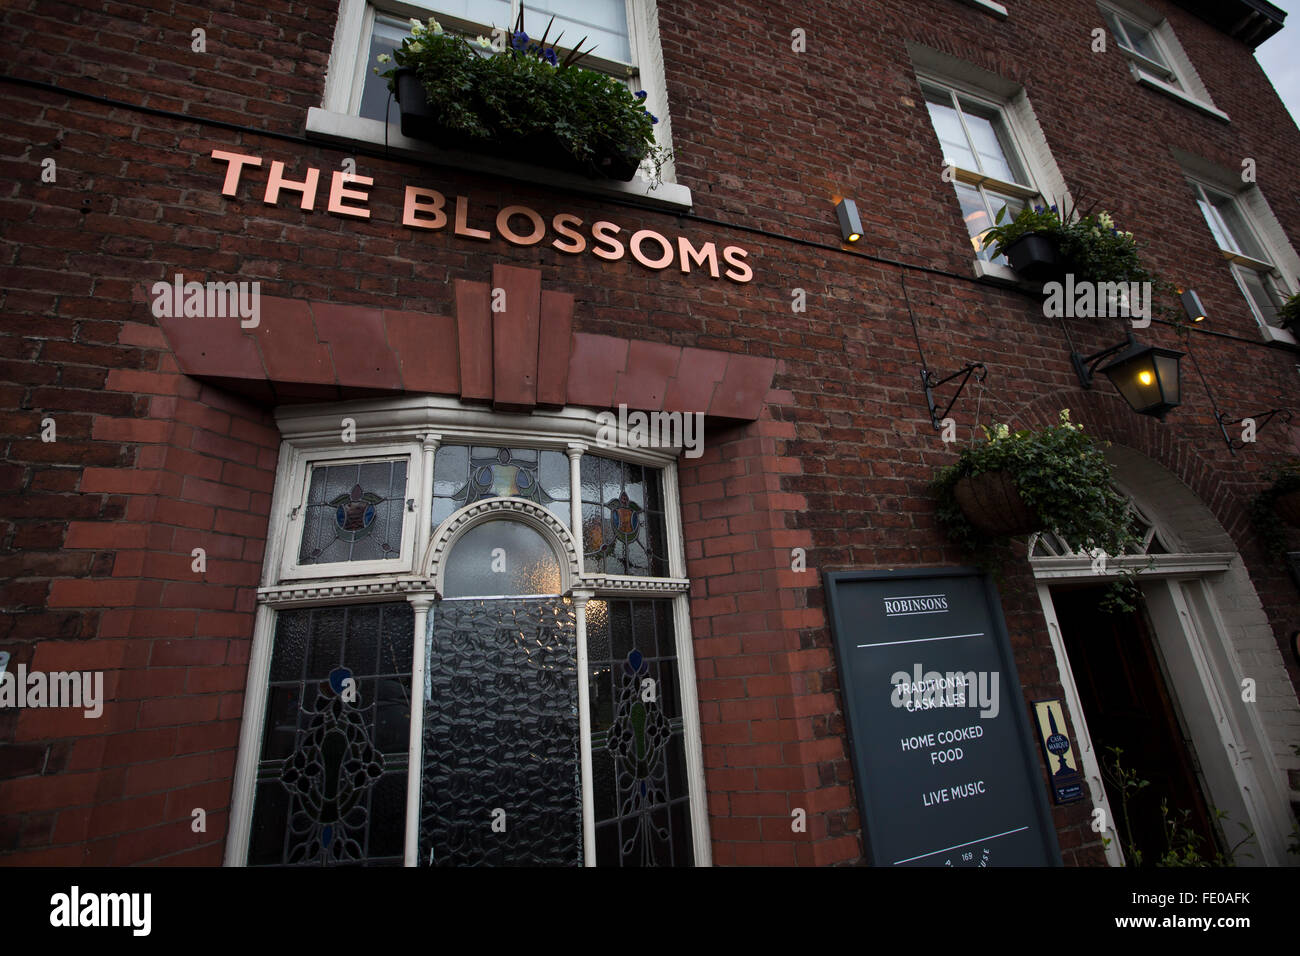 The Blossoms pub in Stockport which the band Blossoms, take their name. The guitar pop band have come fourth on the BBC Sound of 2016 list, which highlights the hottest new acts for the new year. The five members, who were all born in the same Stockport hospital, formed in 2013 and have honed their sound by rehearsing in their bassist's granddad's scaffolding yard take their name from a local pub. Stock Photo